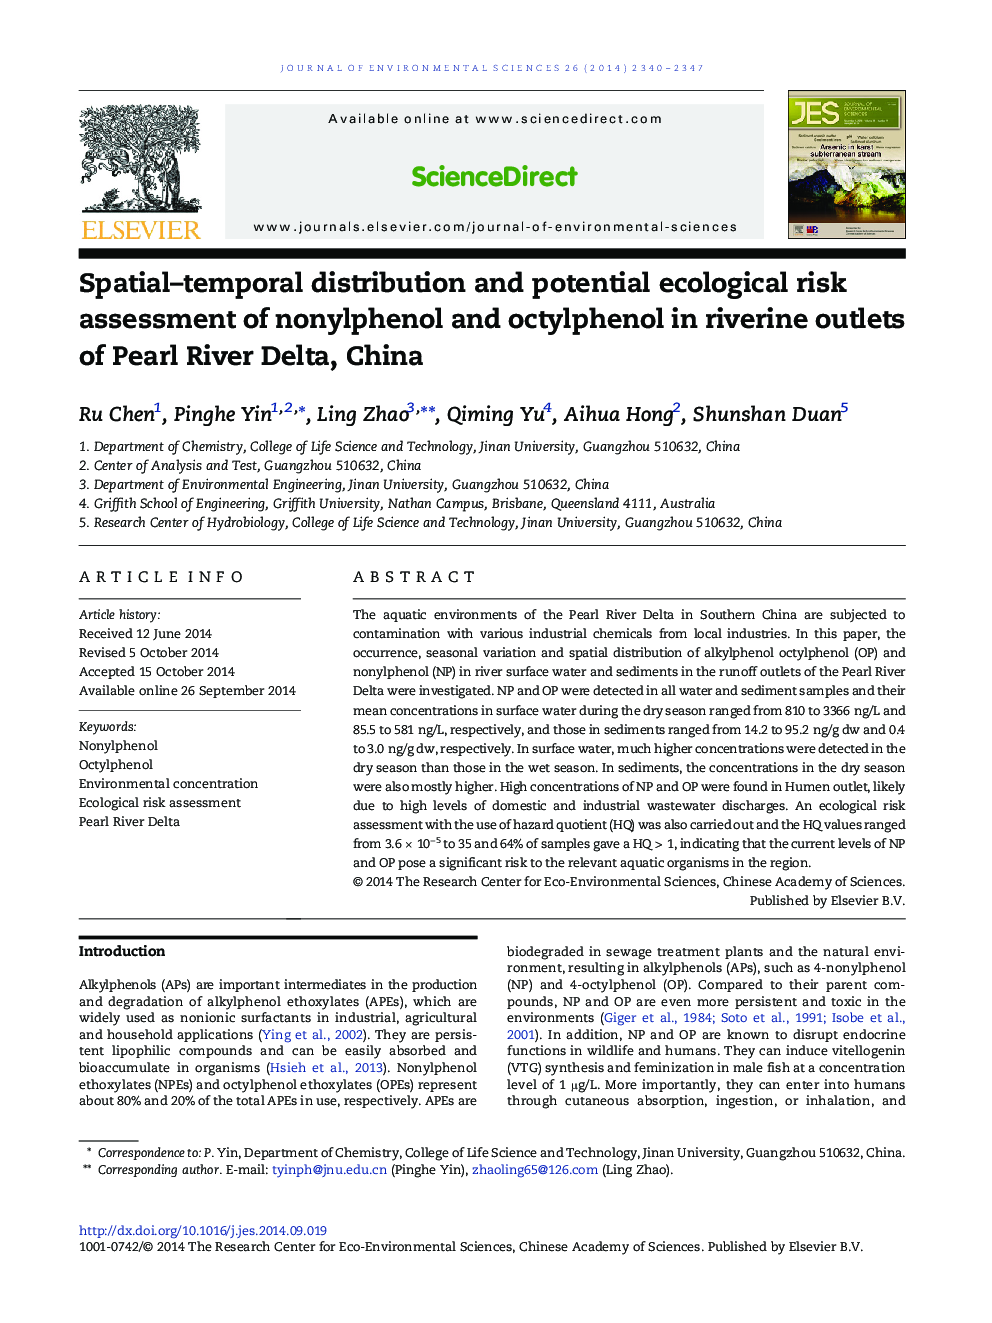 Spatial–temporal distribution and potential ecological risk assessment of nonylphenol and octylphenol in riverine outlets of Pearl River Delta, China